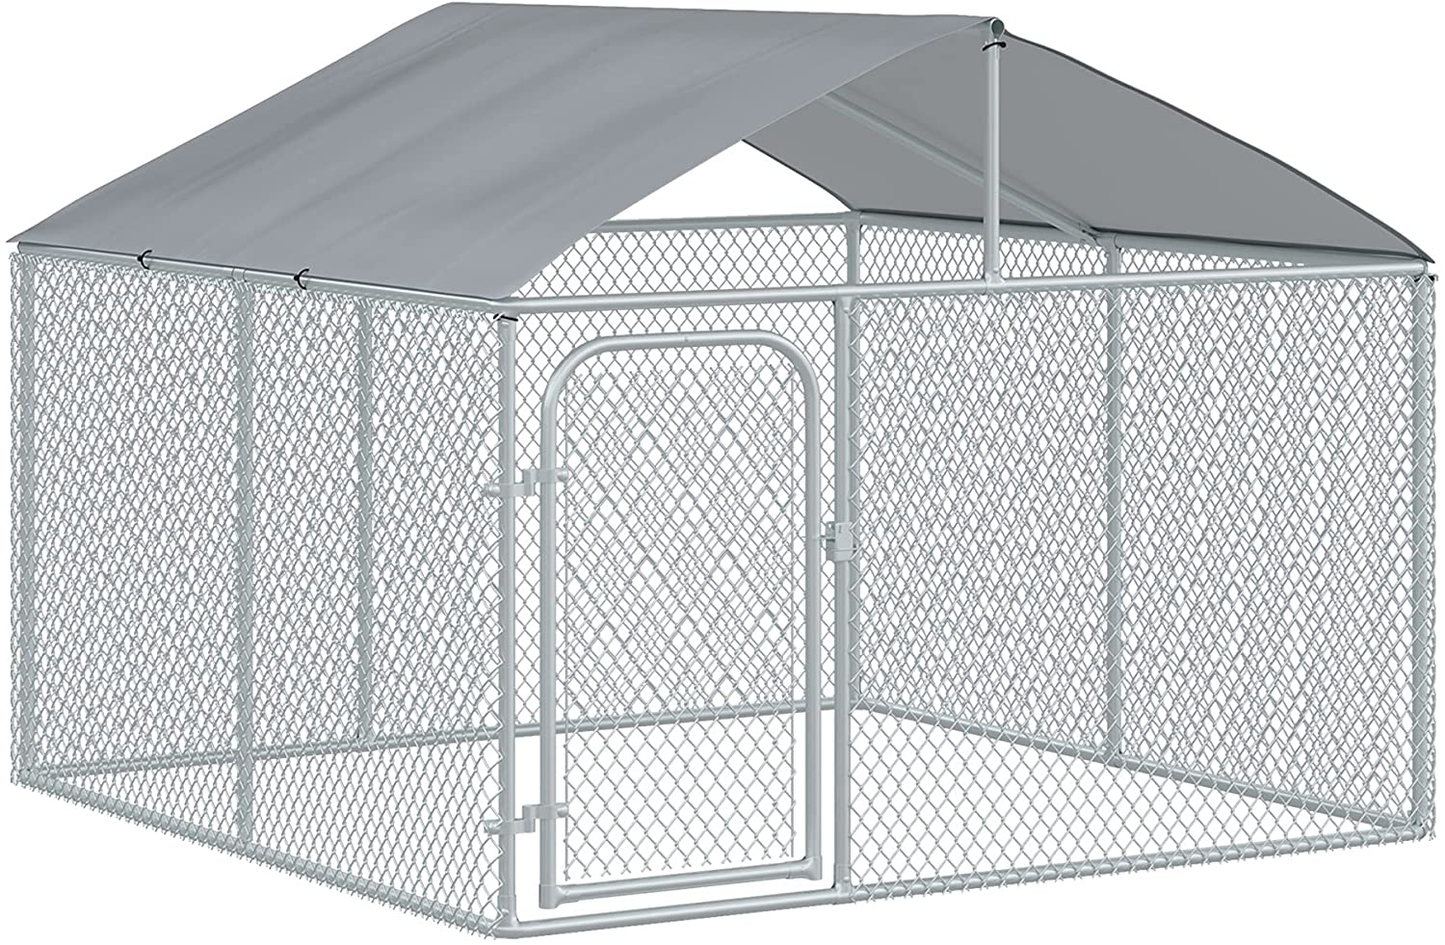 Pawhut Outdoor Dog Kennel Galvanized Steel Fence with Cover Secure Lock Mesh Sidewalls for Backyard Animals & Pet Supplies > Pet Supplies > Dog Supplies > Dog Houses PawHut 7.5' x 7.5 ' x 5.6'  